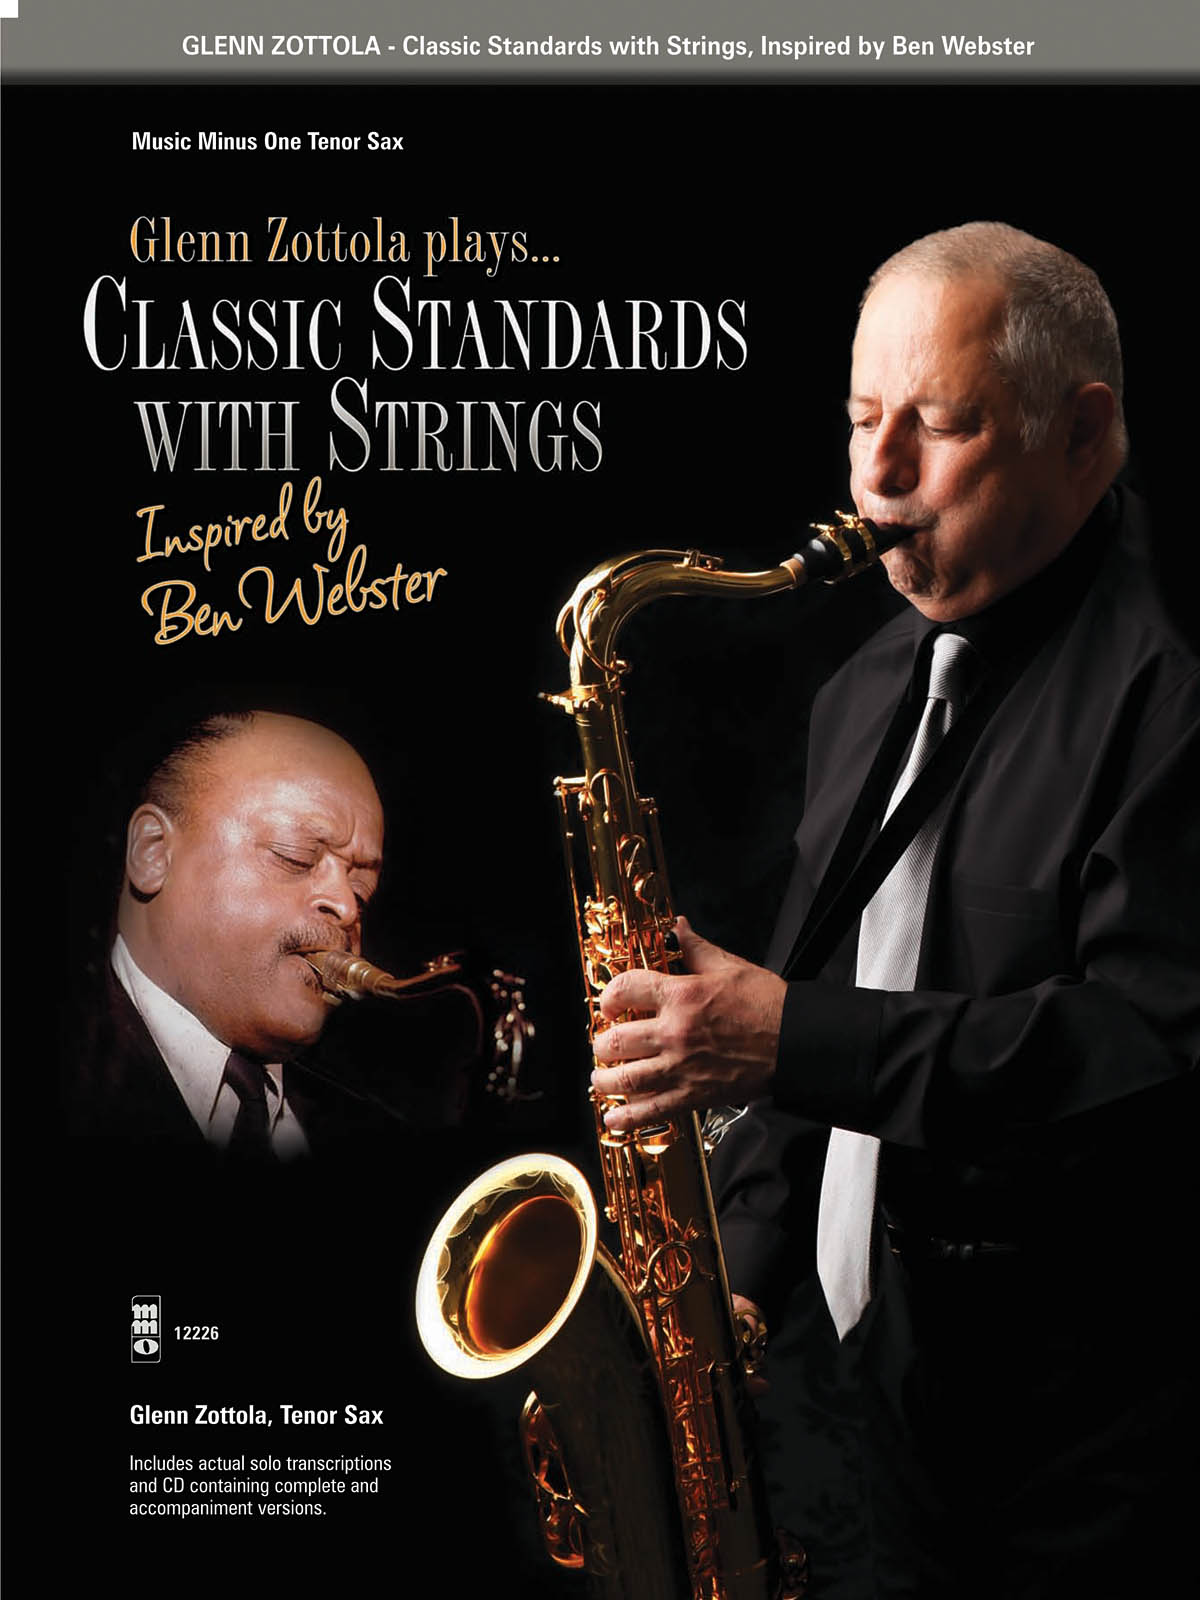 Classic Standards with Strings - Inspired by Ben Webster - noty na tenor saxofon